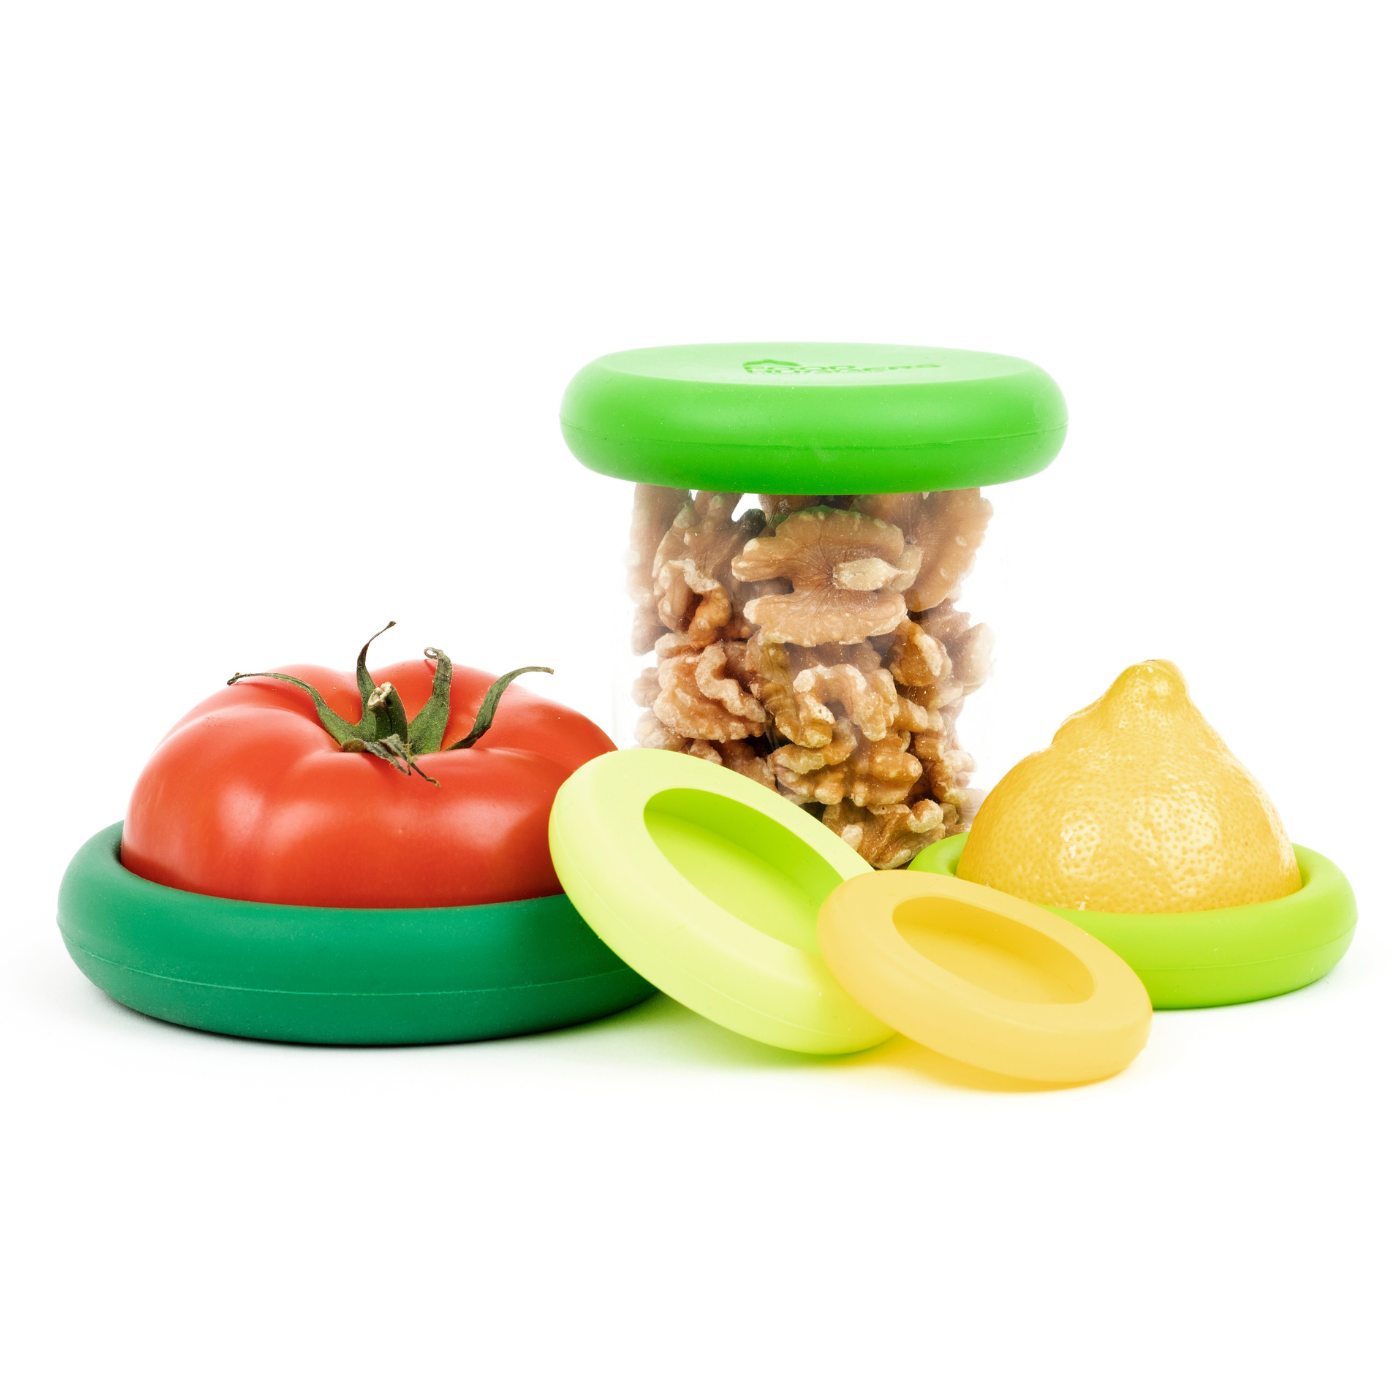 Are reusable food containers as good for the environment as we think?